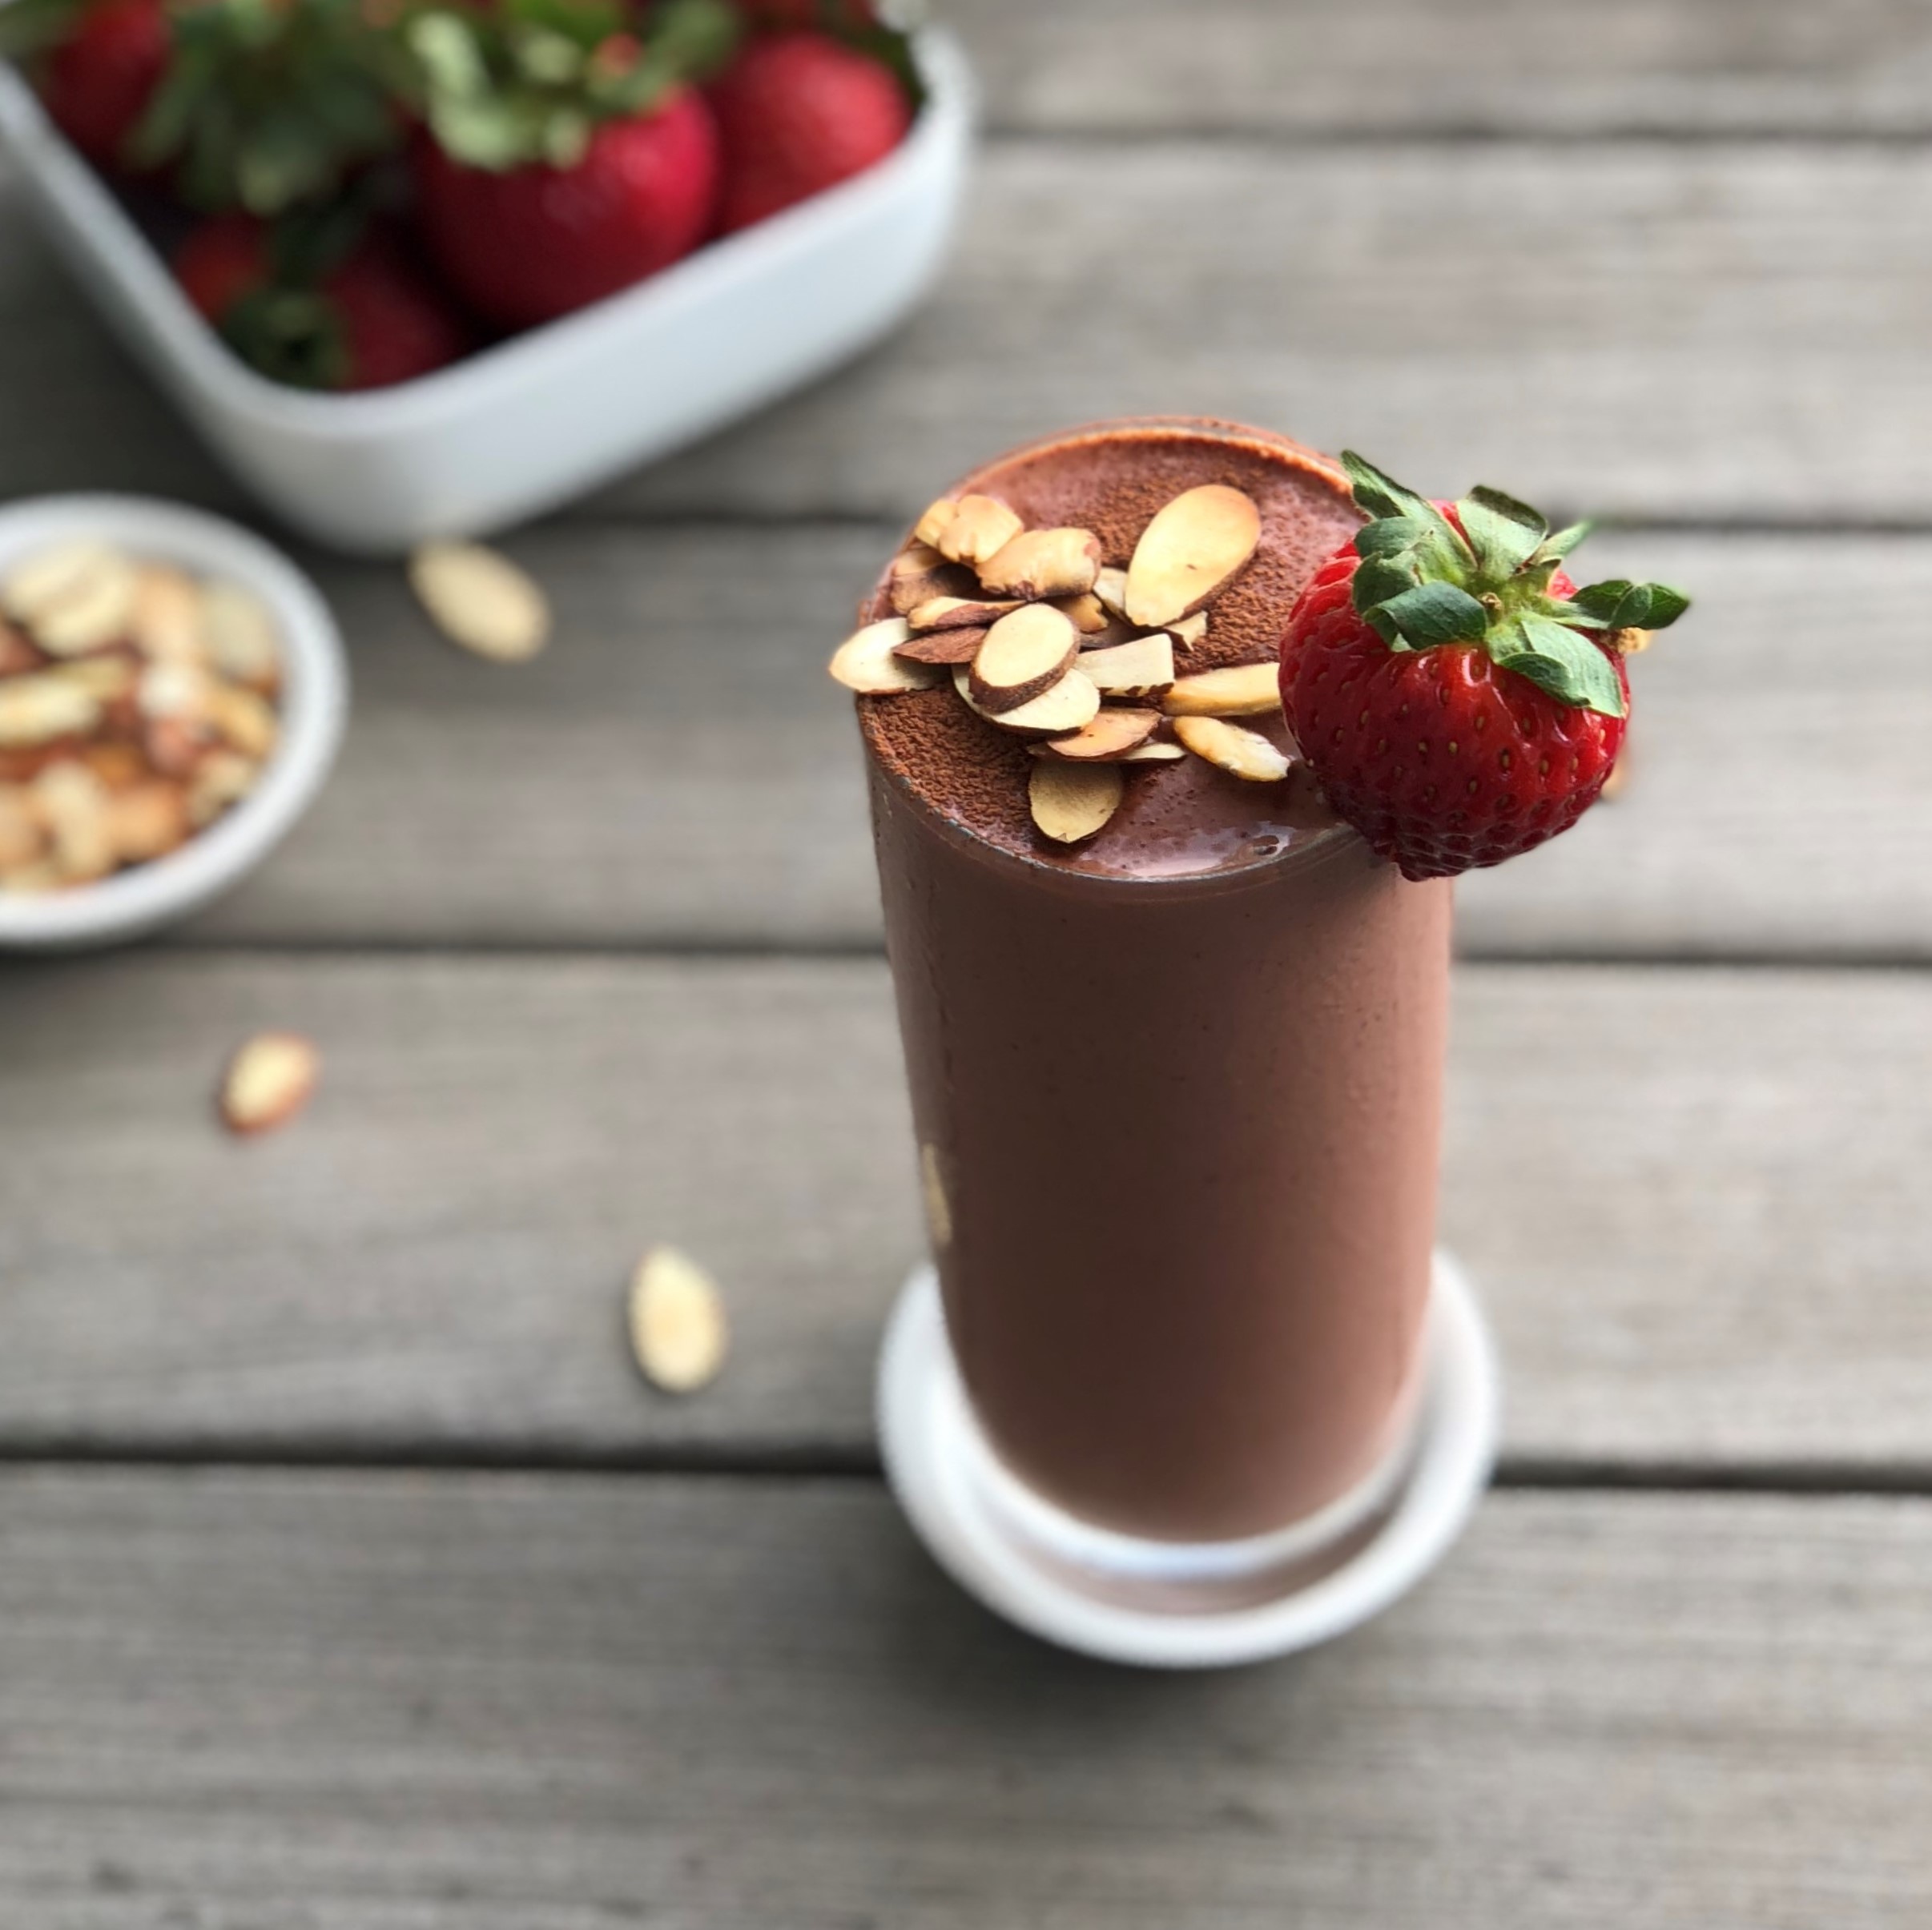 almond & chocolate-covered strawberry smoothie